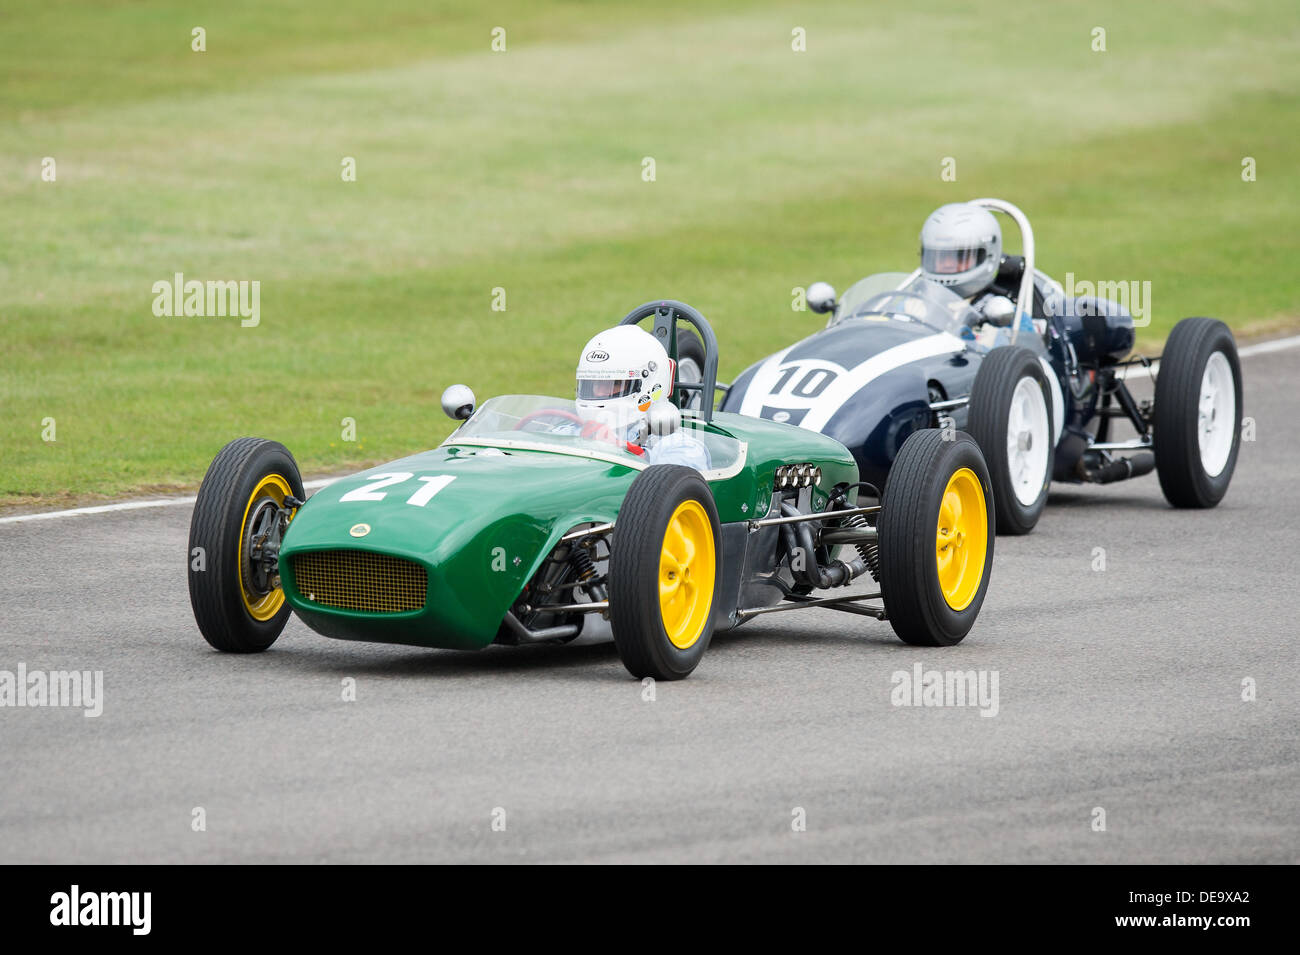 Chichester, West Sussex, UK. 13th Sep, 2013. Goodwood Revival. Goodwood Racing Circuit, West Sussex - Friday 13th September. Racing action on the track. © MeonStock/Alamy Live News Stock Photo